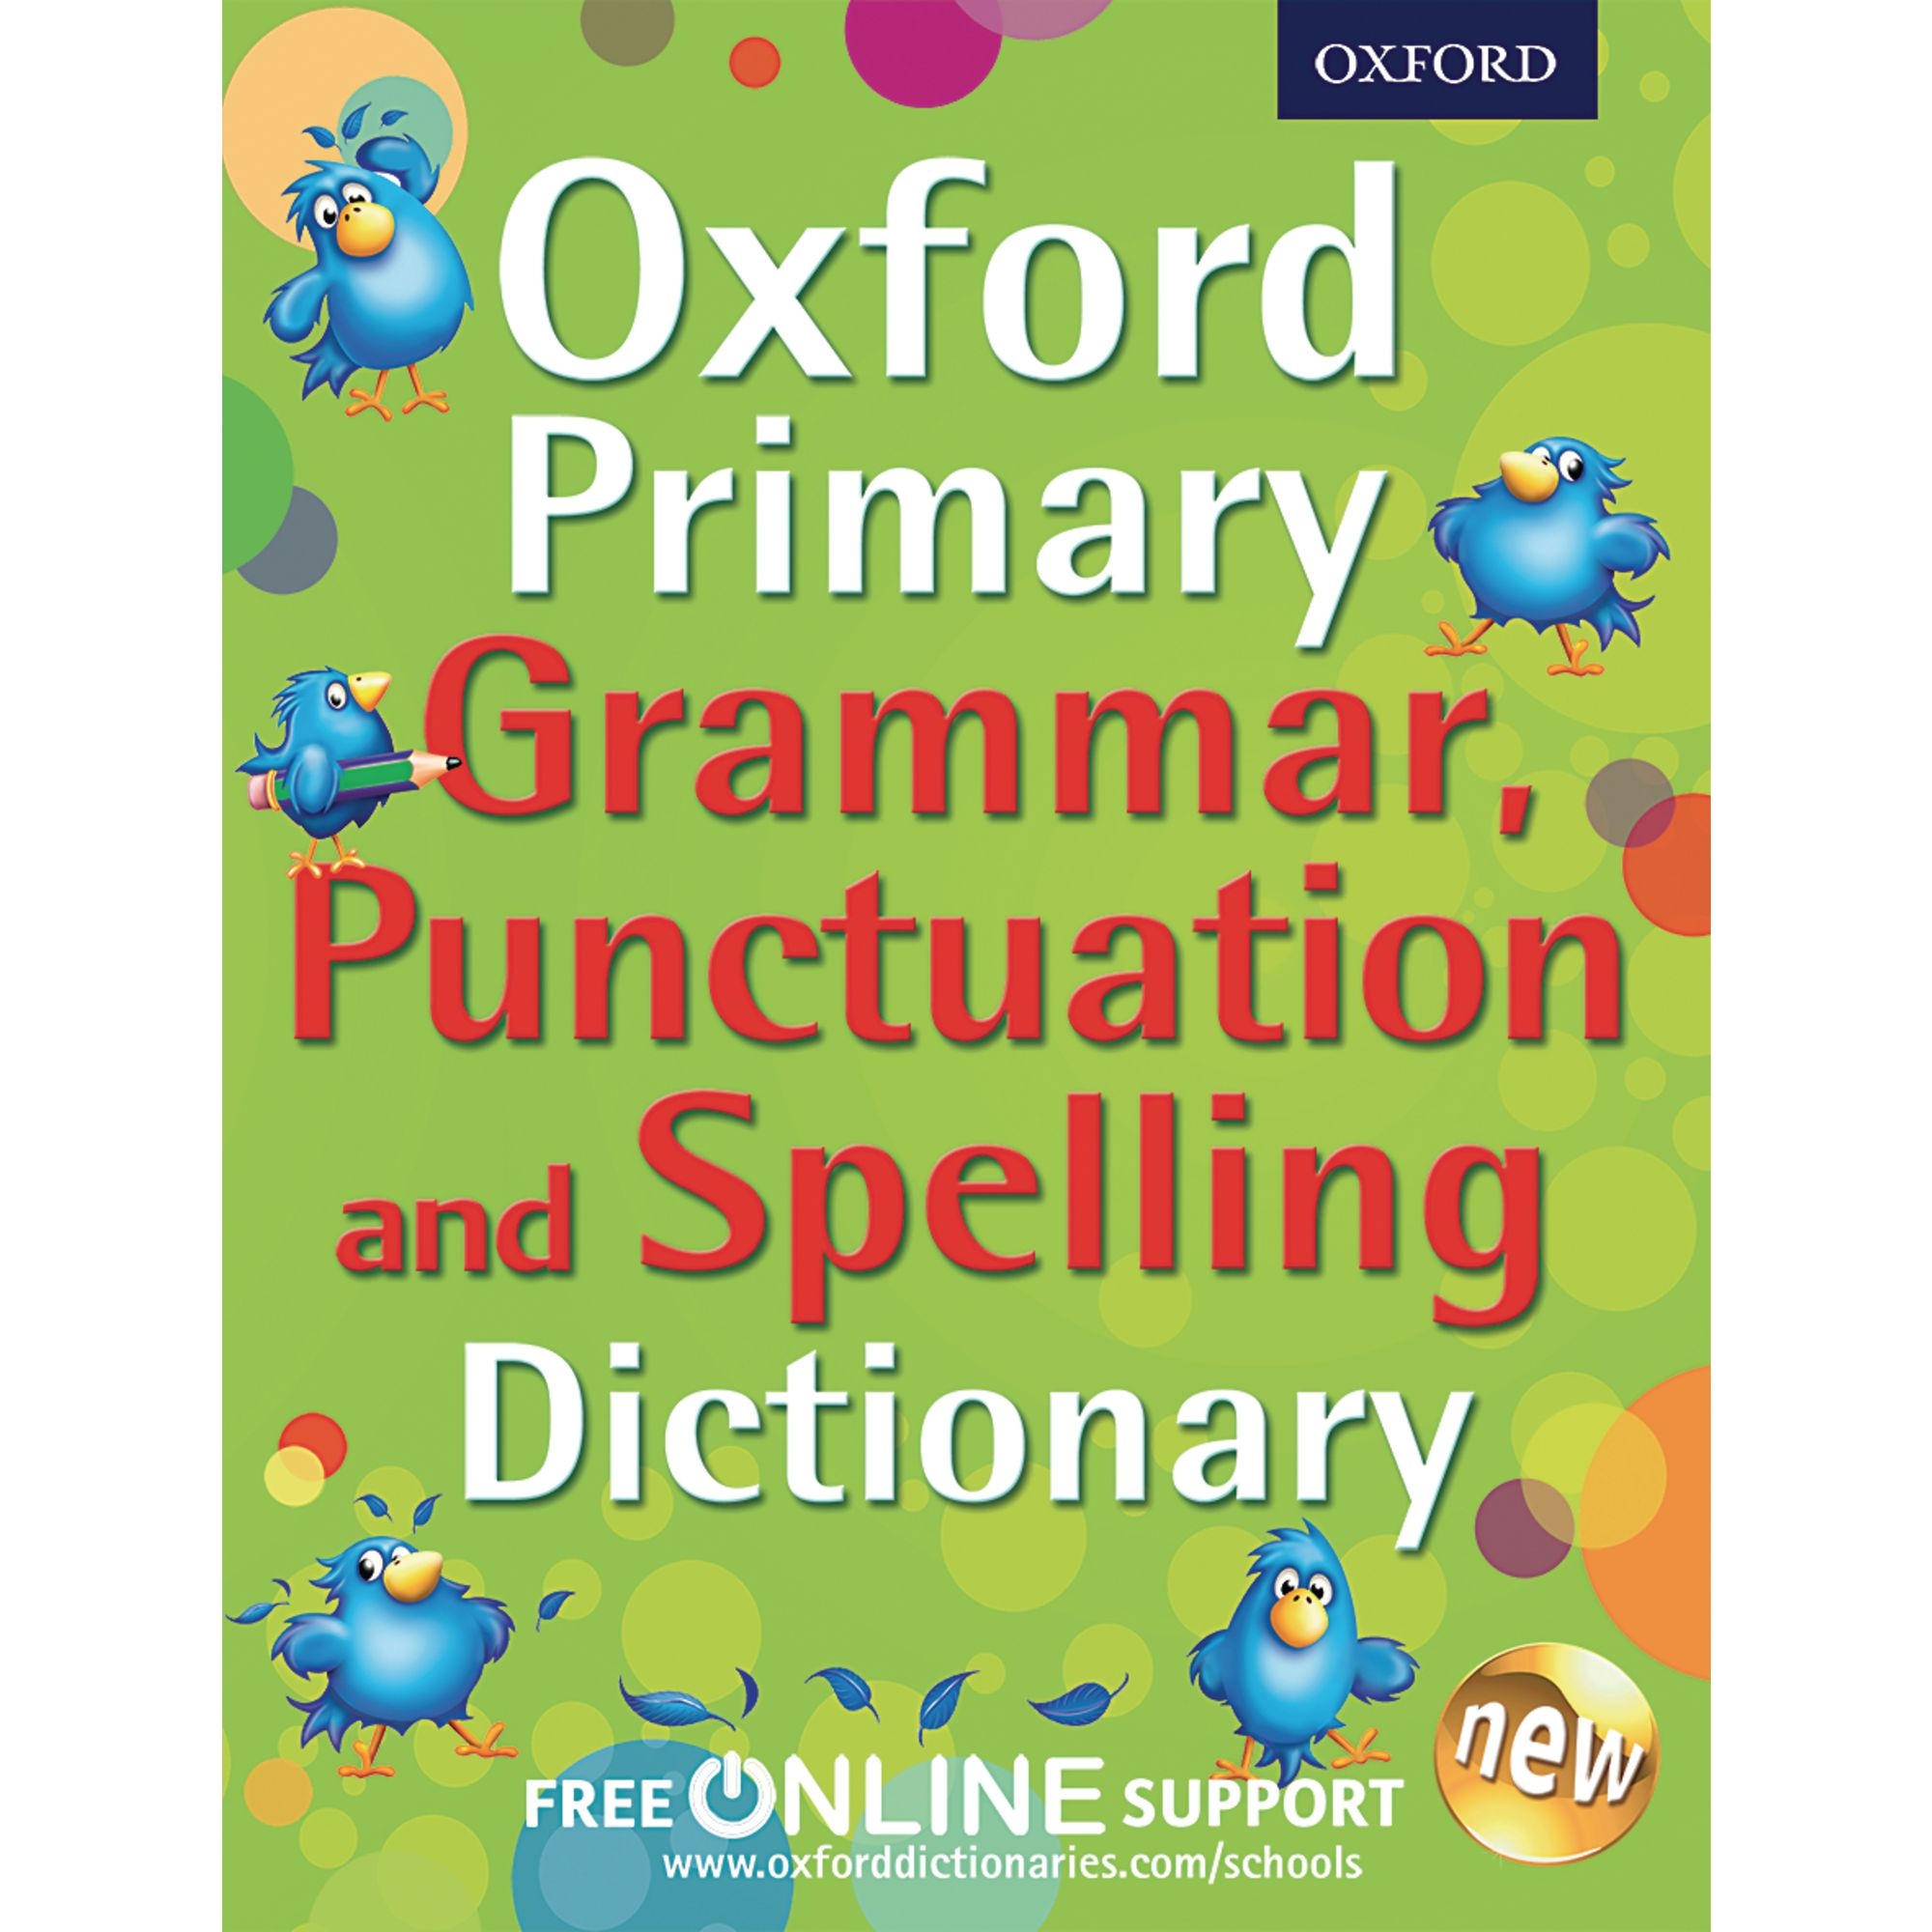 Oxford Primary Grammar, Punctuation and Spelling Dictionary Pack of 5